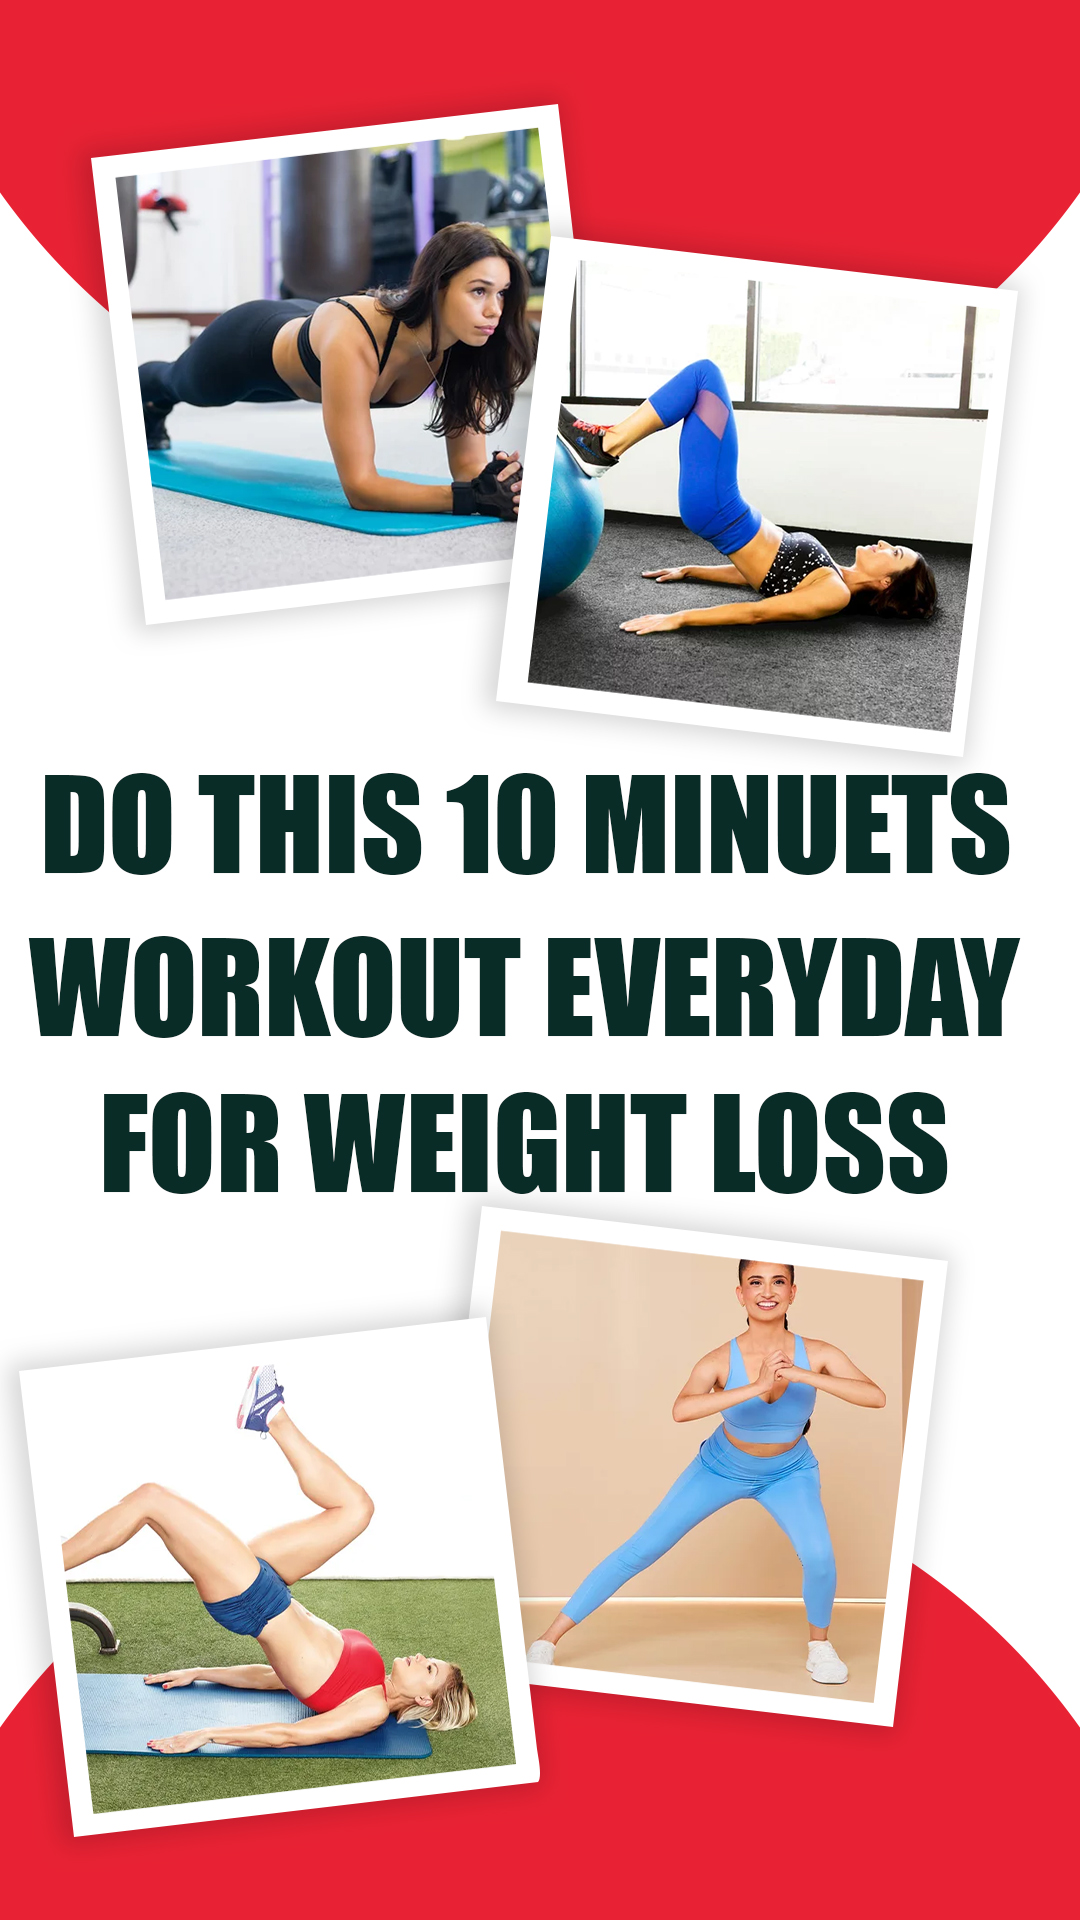 5 Weight-Loss Workout You Can Do in Just 10 Minutes Every Day